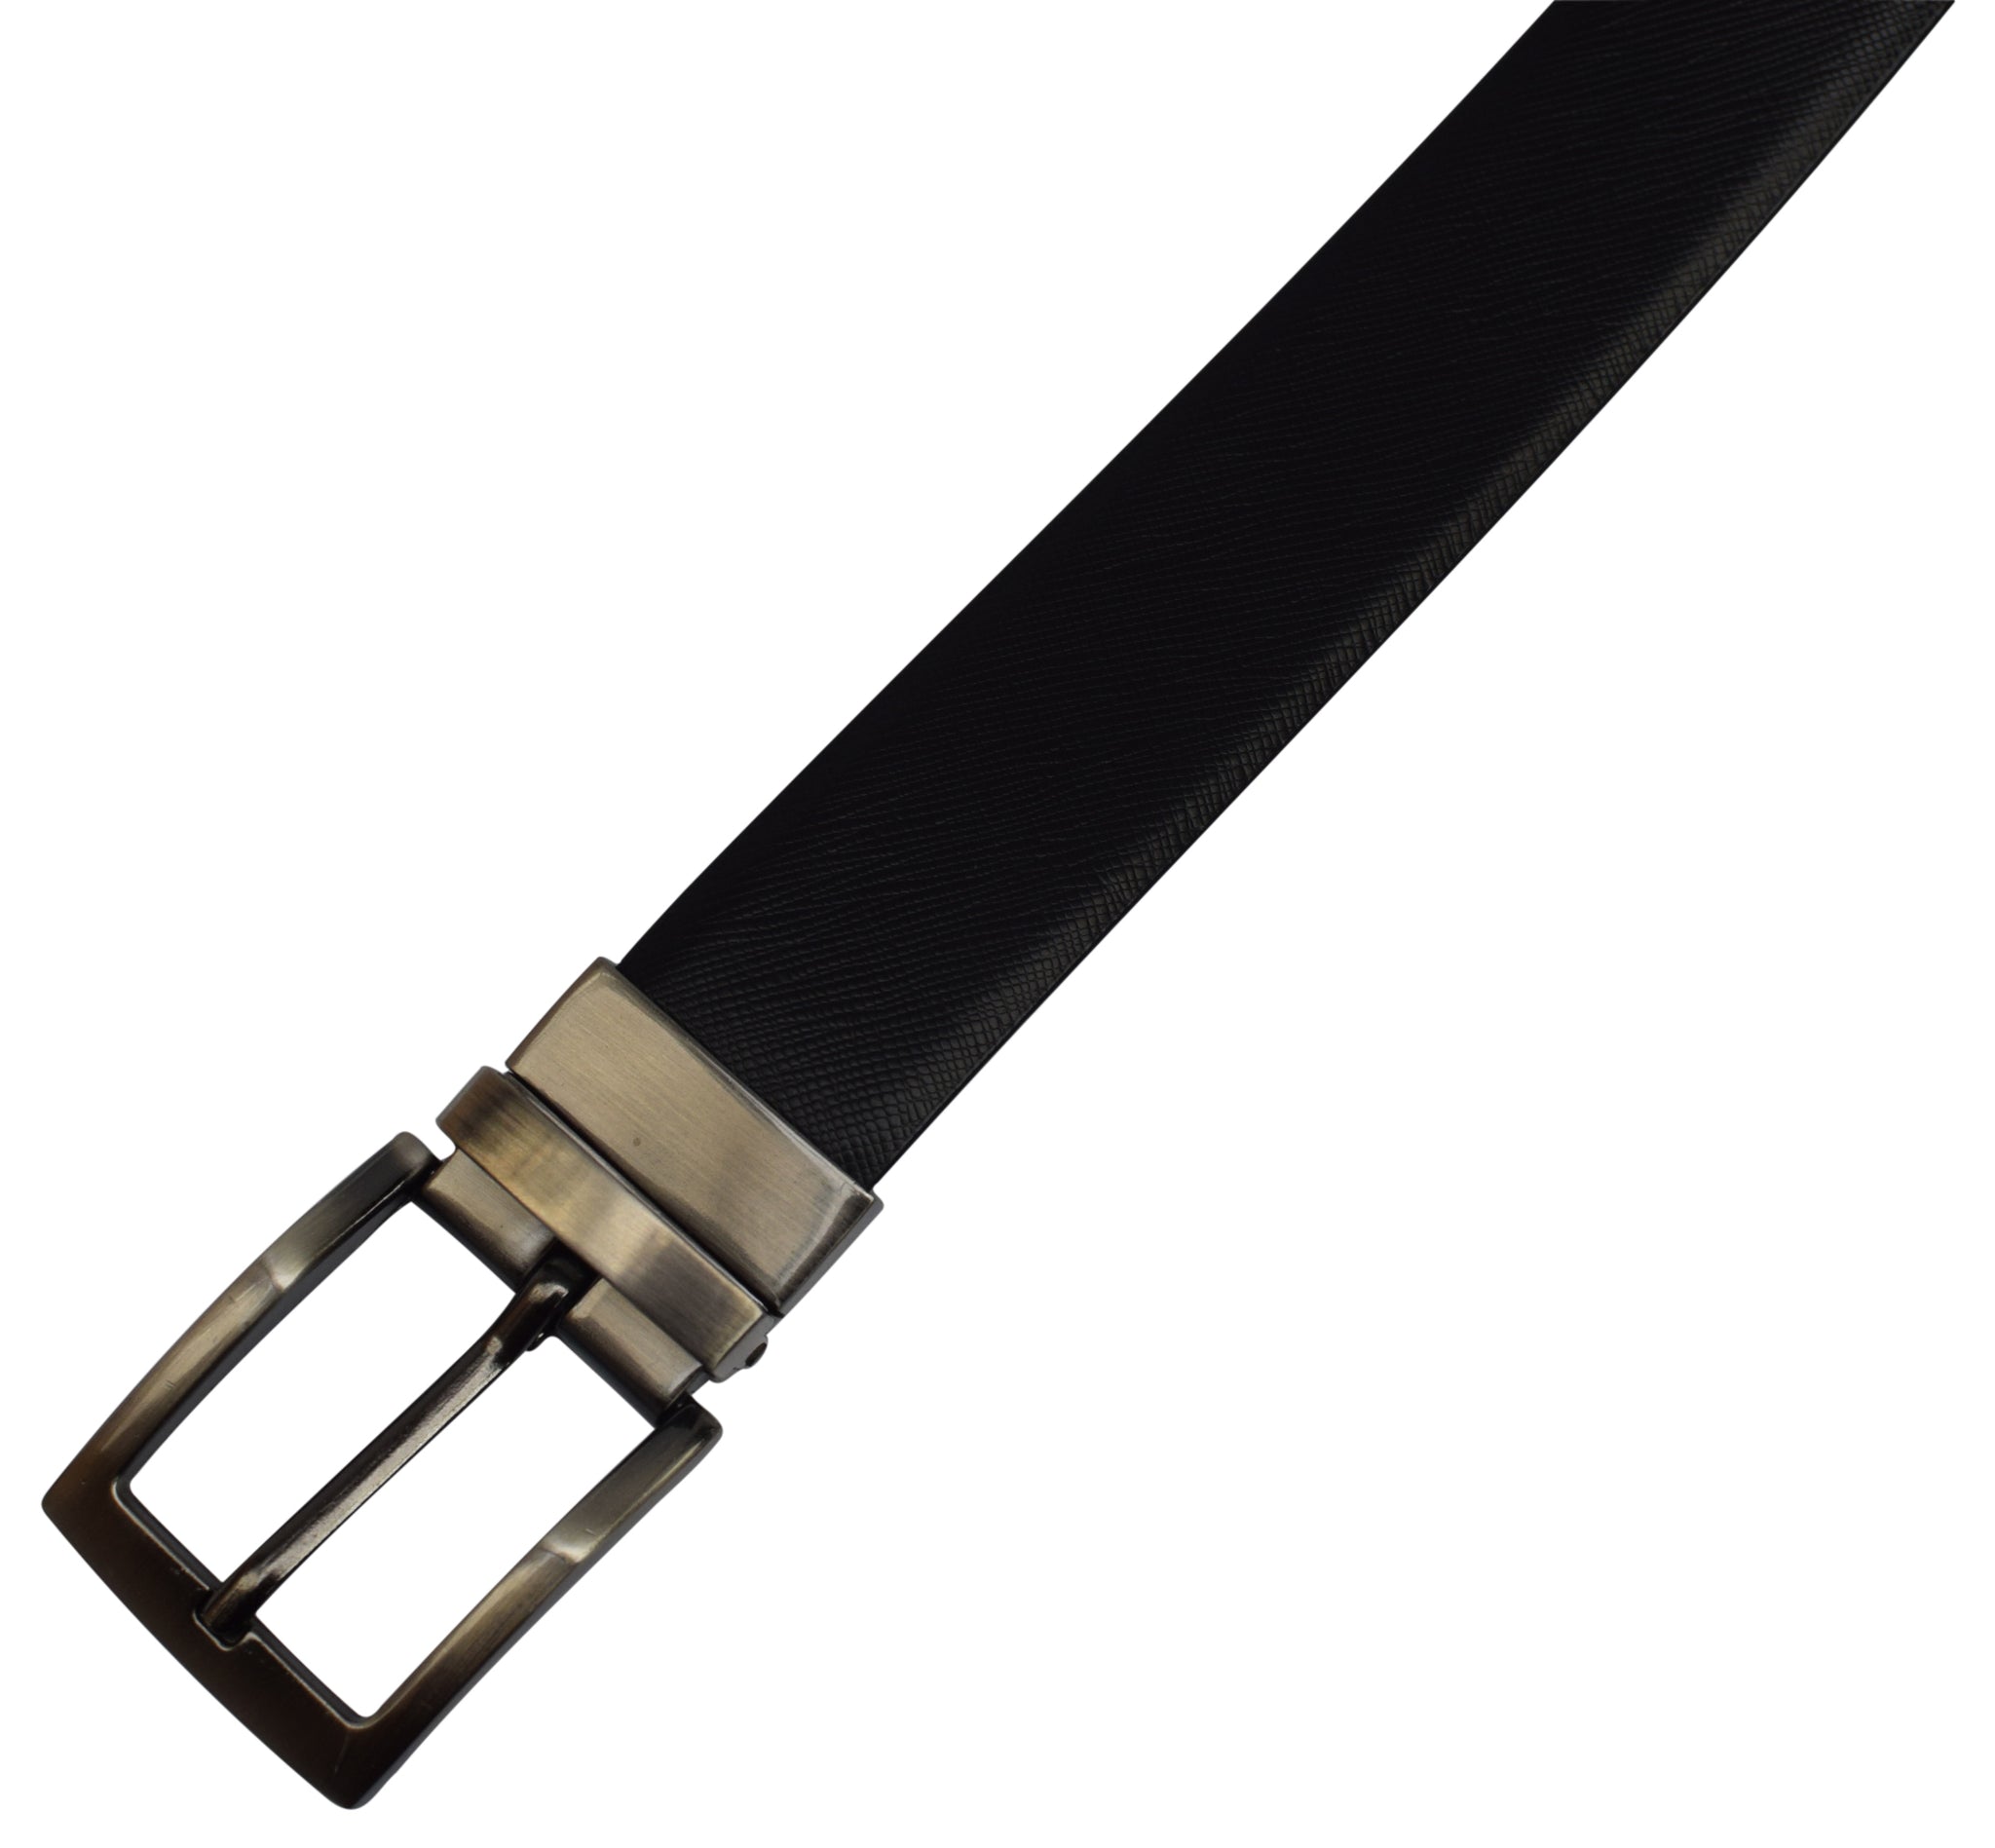 Steel Mens Reversible Leather Belt at Best Price in Unnao